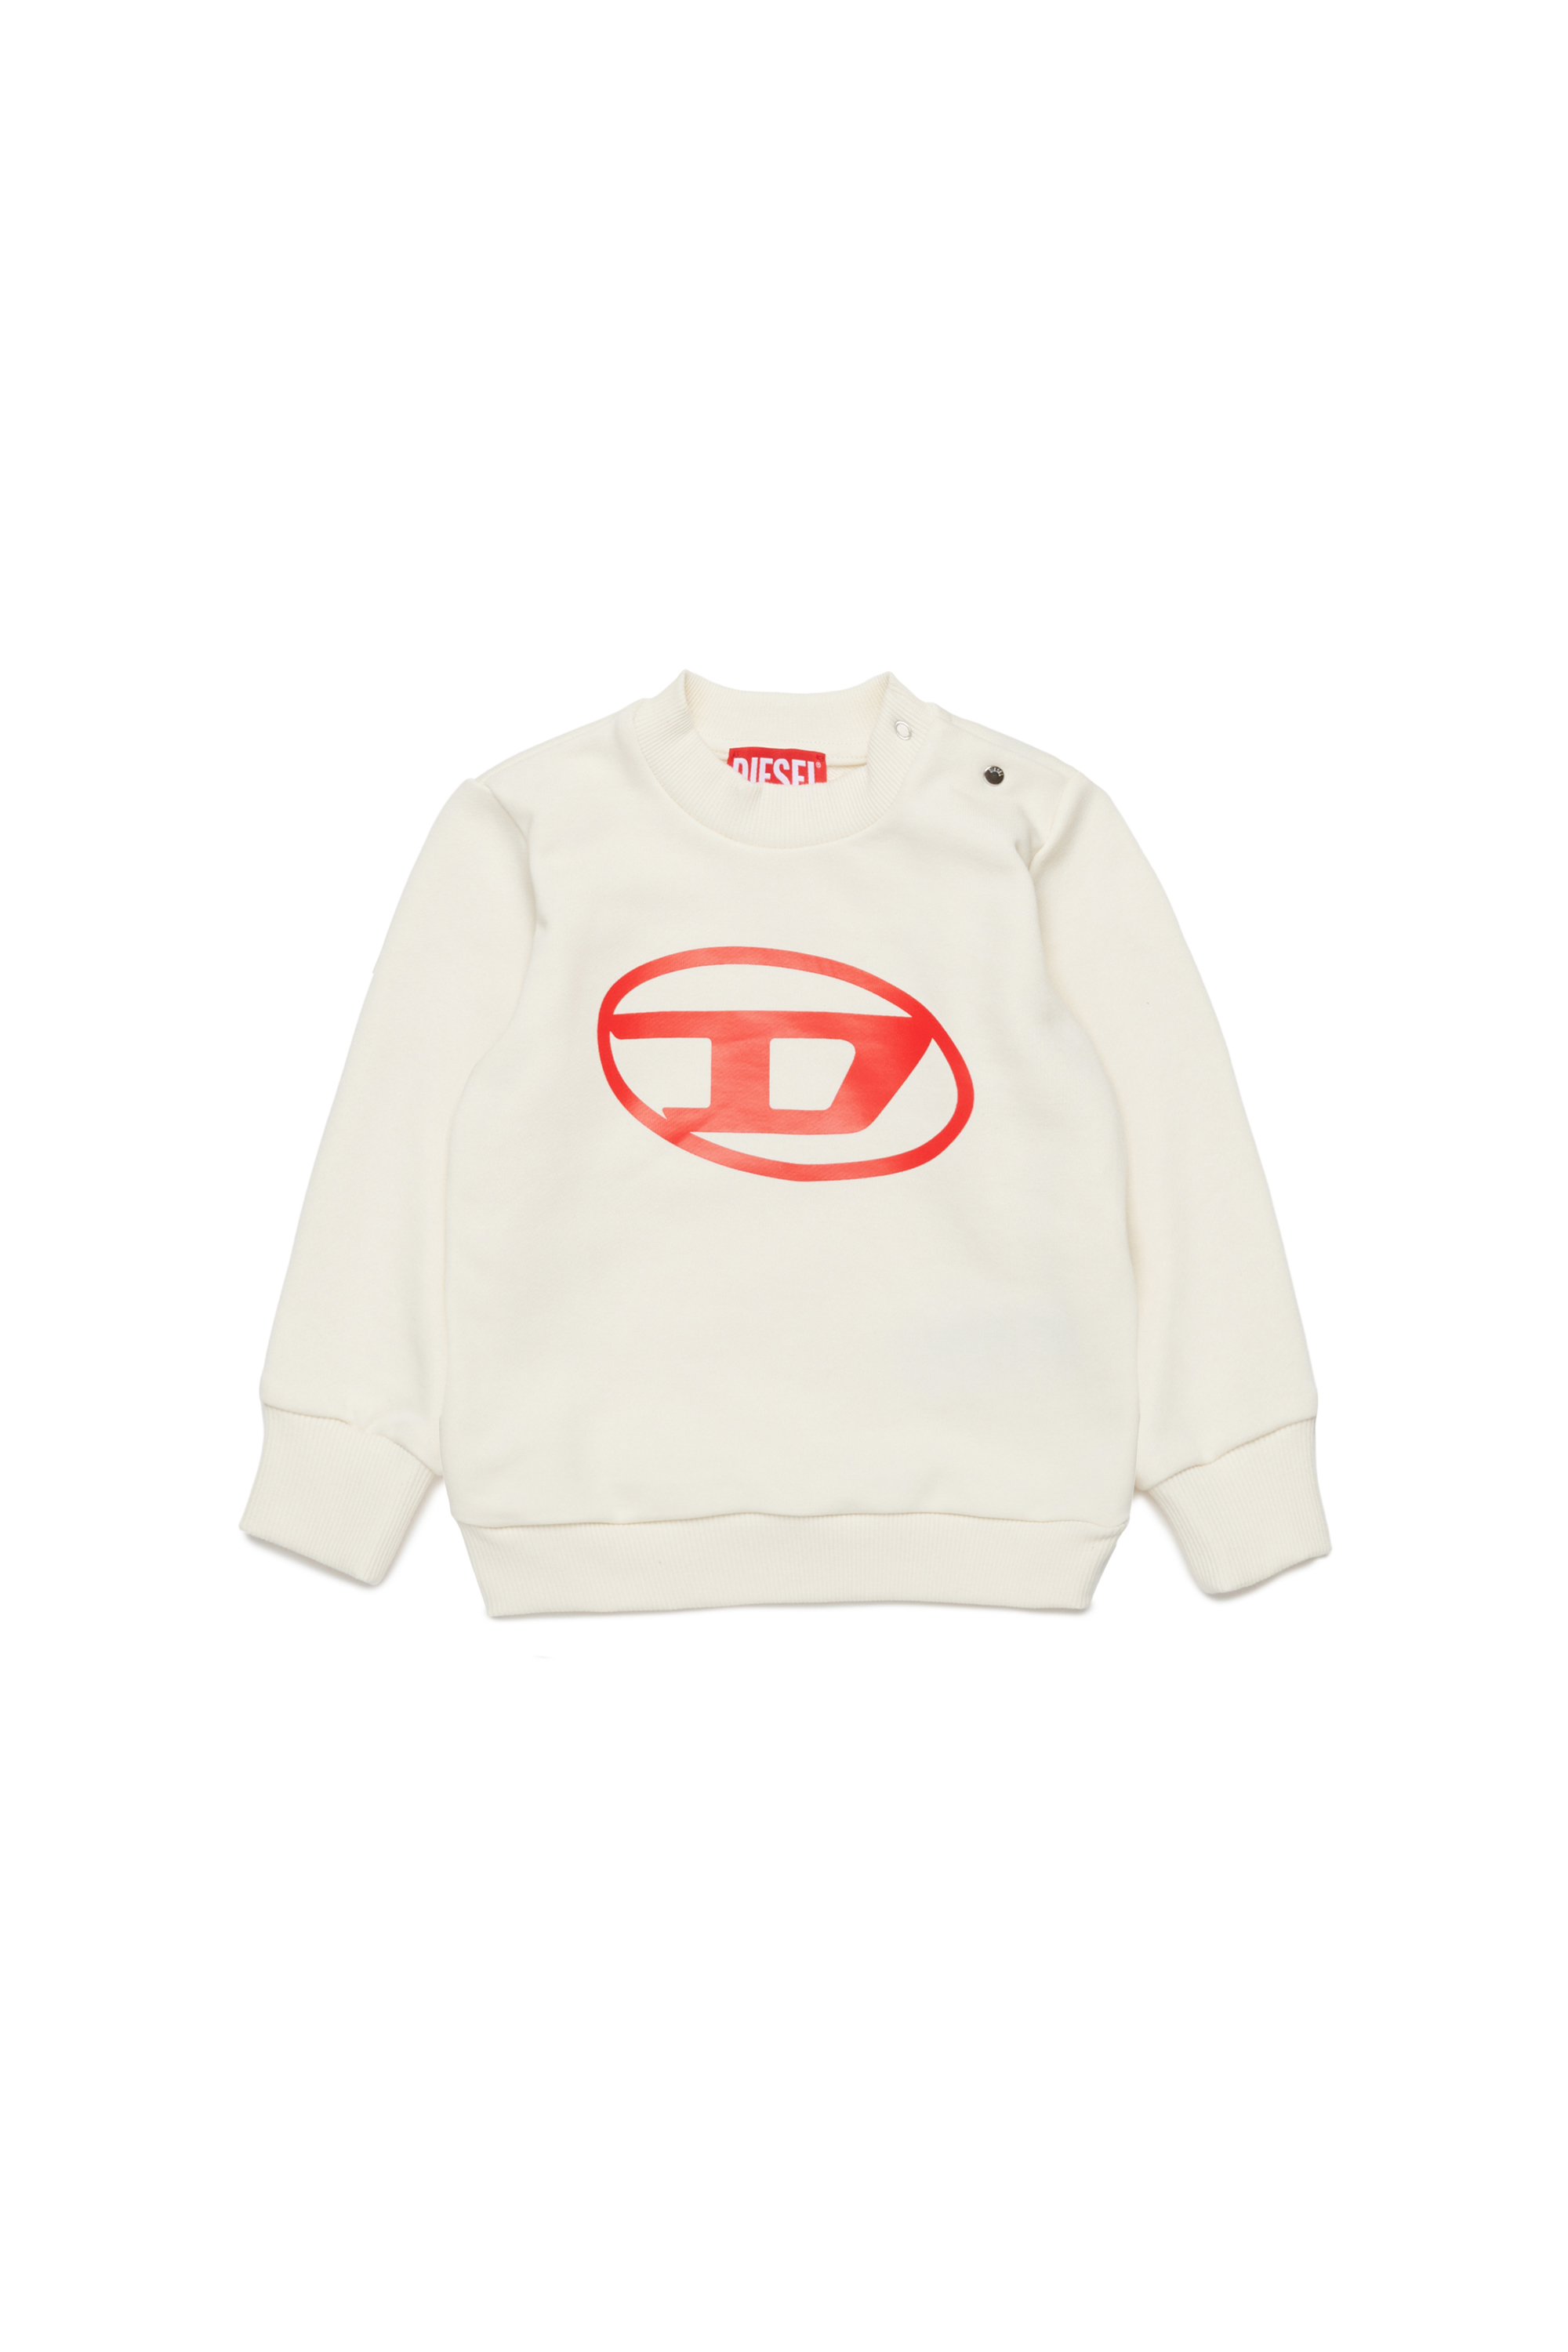 Diesel - SCERB, Unisex Sweatshirt with Oval D print in White - Image 1